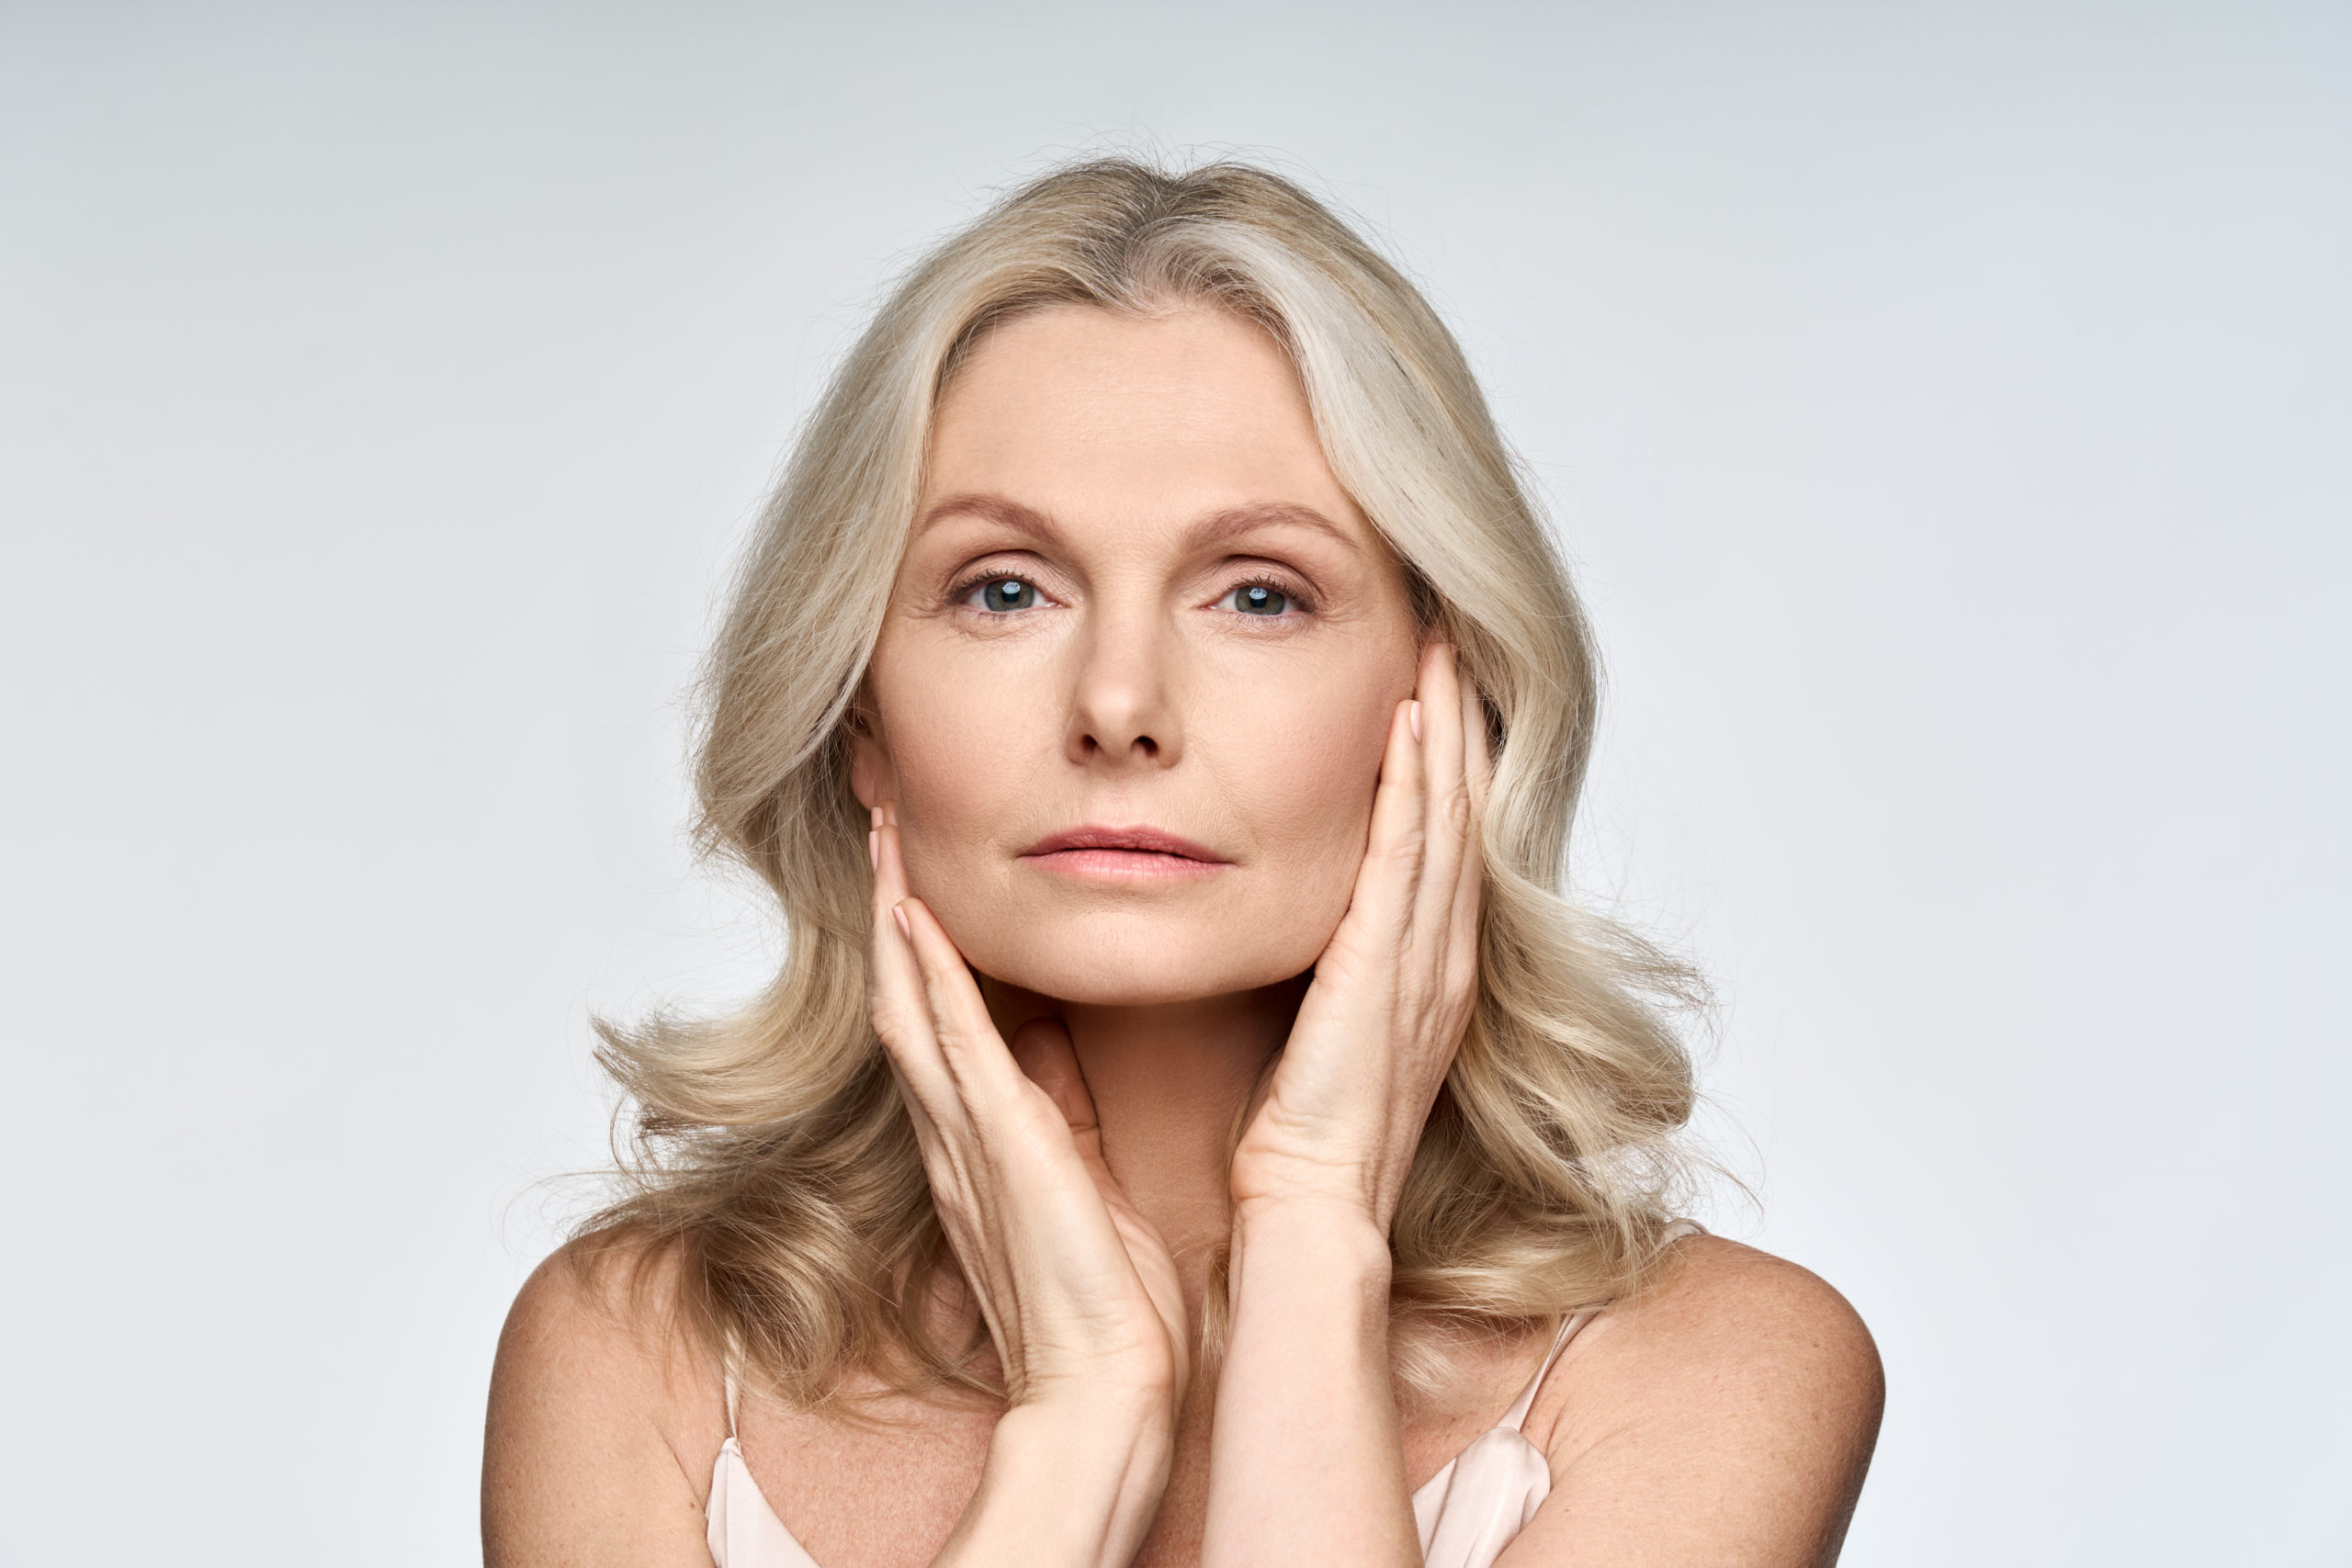 Middle Aged Woman After Skincare using Environ Skincare